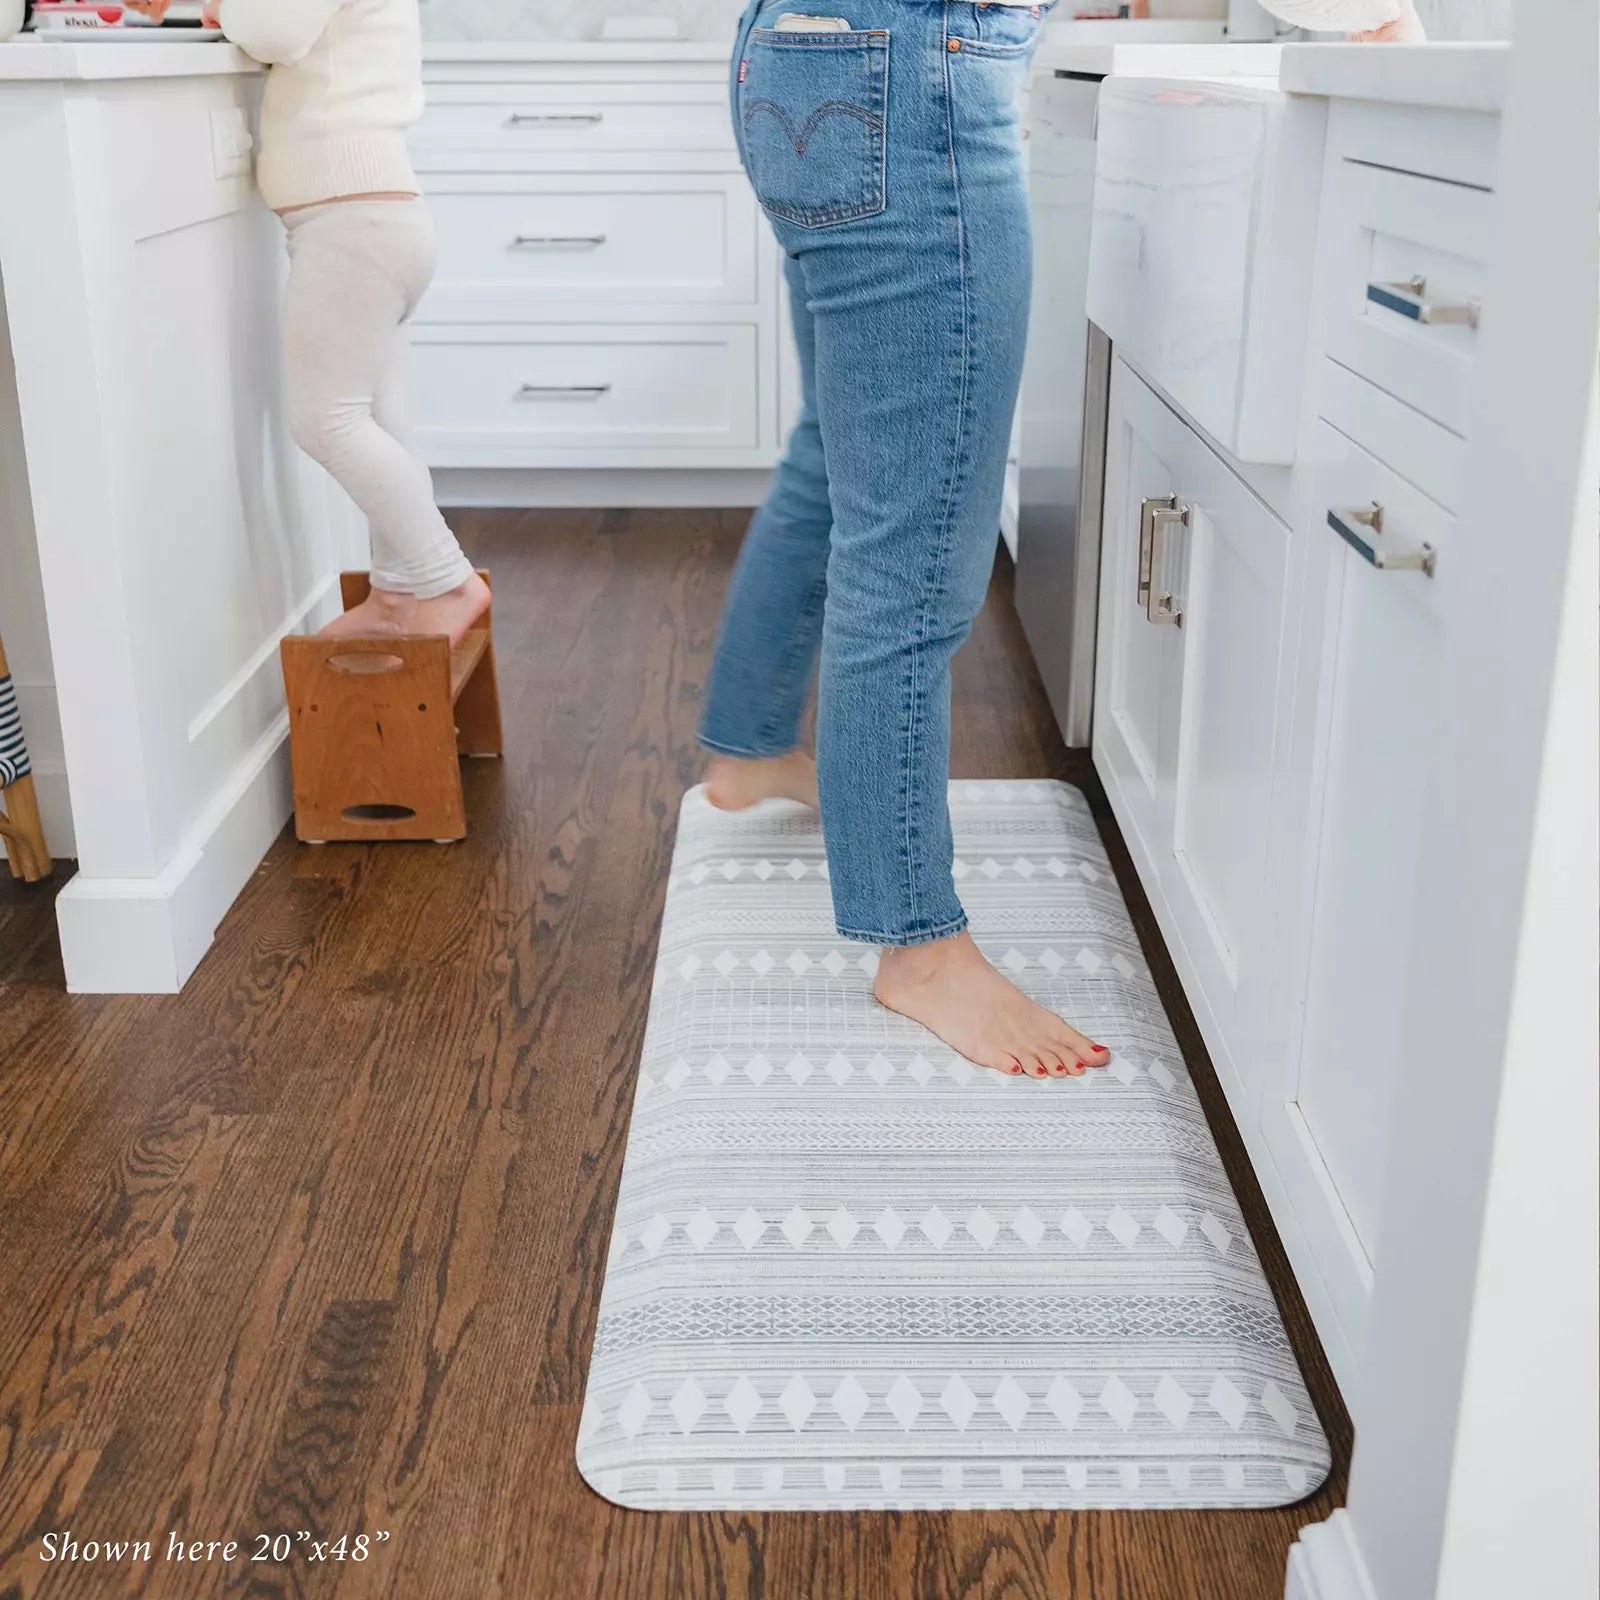 Nordique Fog Gray and White Boho Nordic Print Standing Mat in kitchen with woman washing dishes